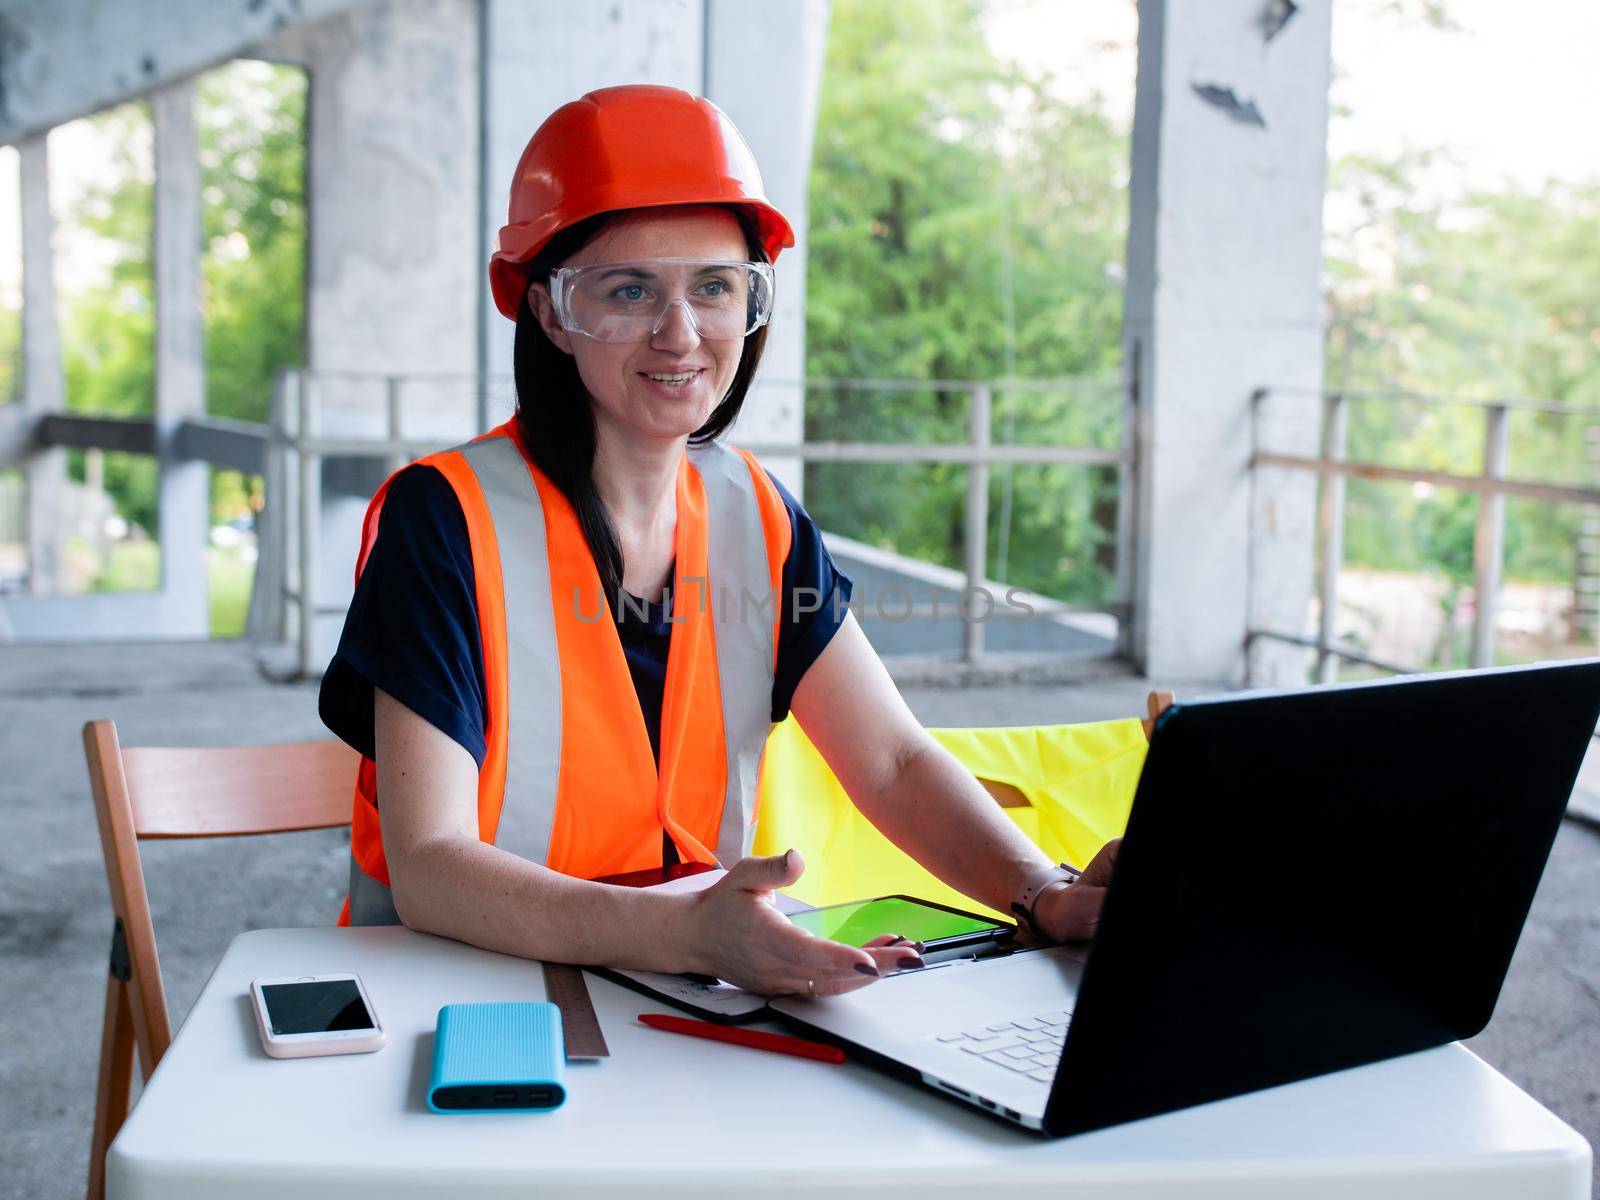 Construction management. Woman manager at a construction site. Woman in a robot builder vest with a laptop. Girl on the background of a building under construction. Construction management company by Utlanov